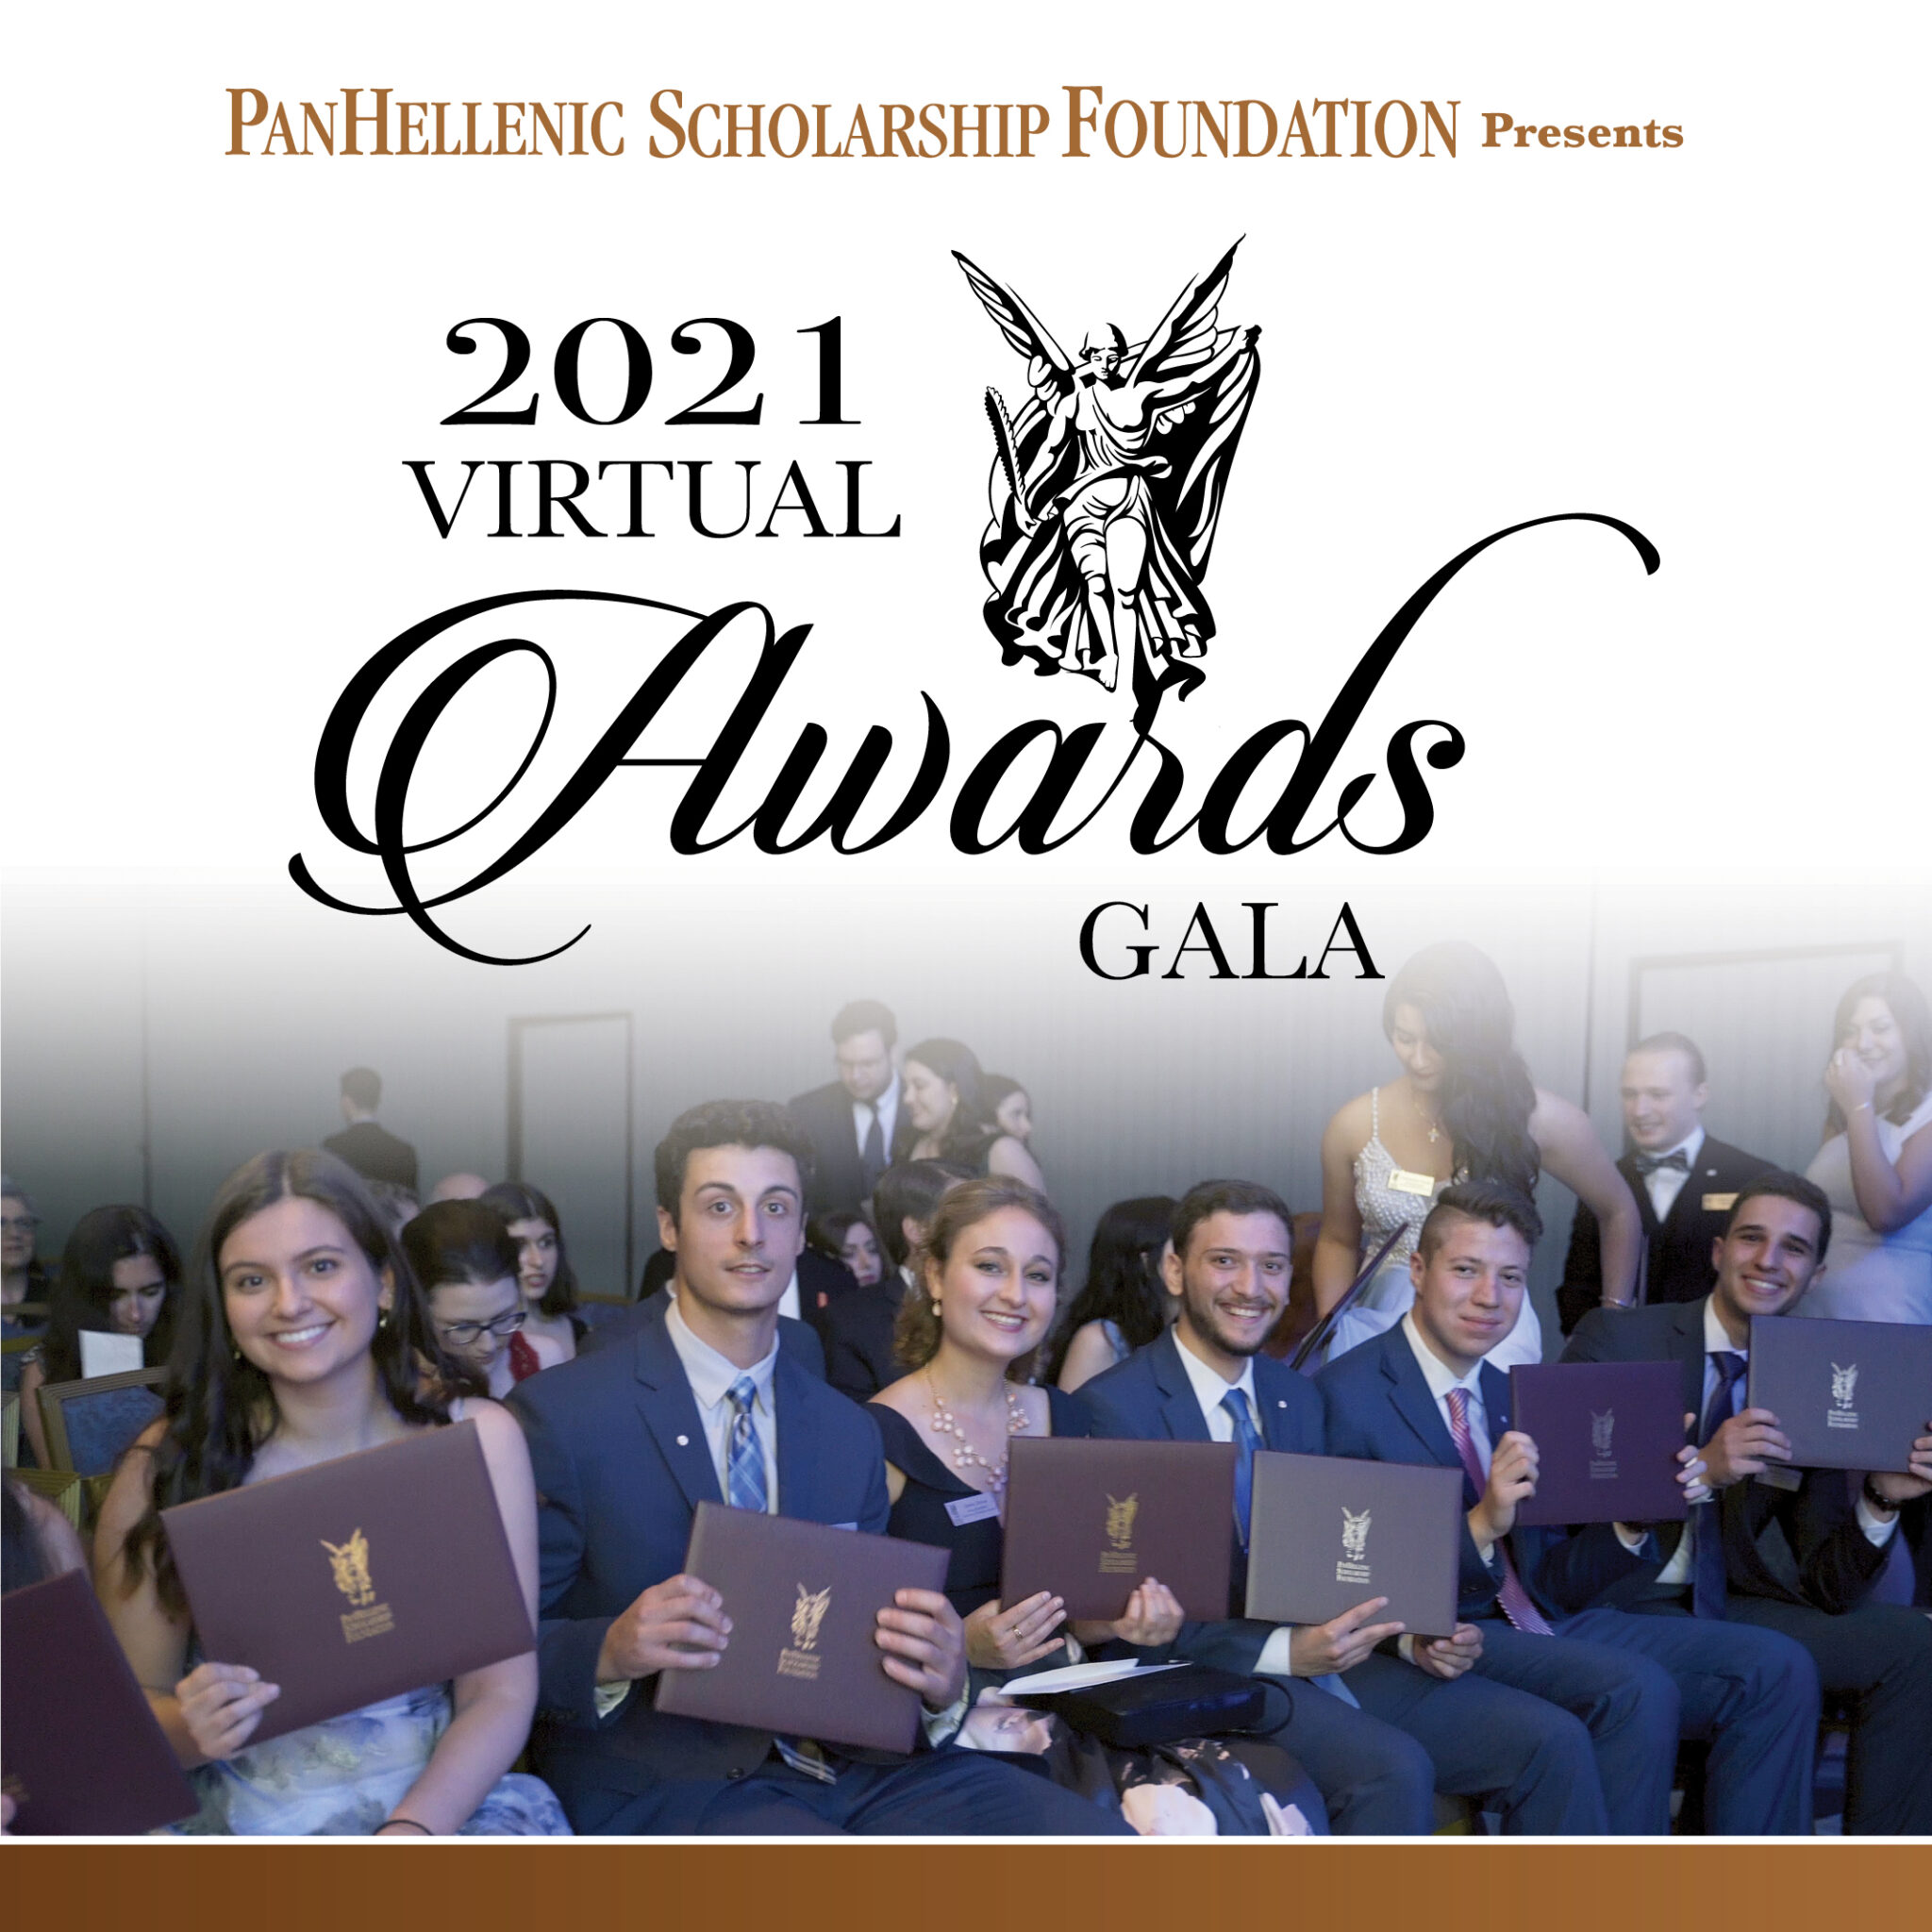 Phsf Announces 250000 In Scholarships And New Surprises Planned For 2021 Virtual Gala